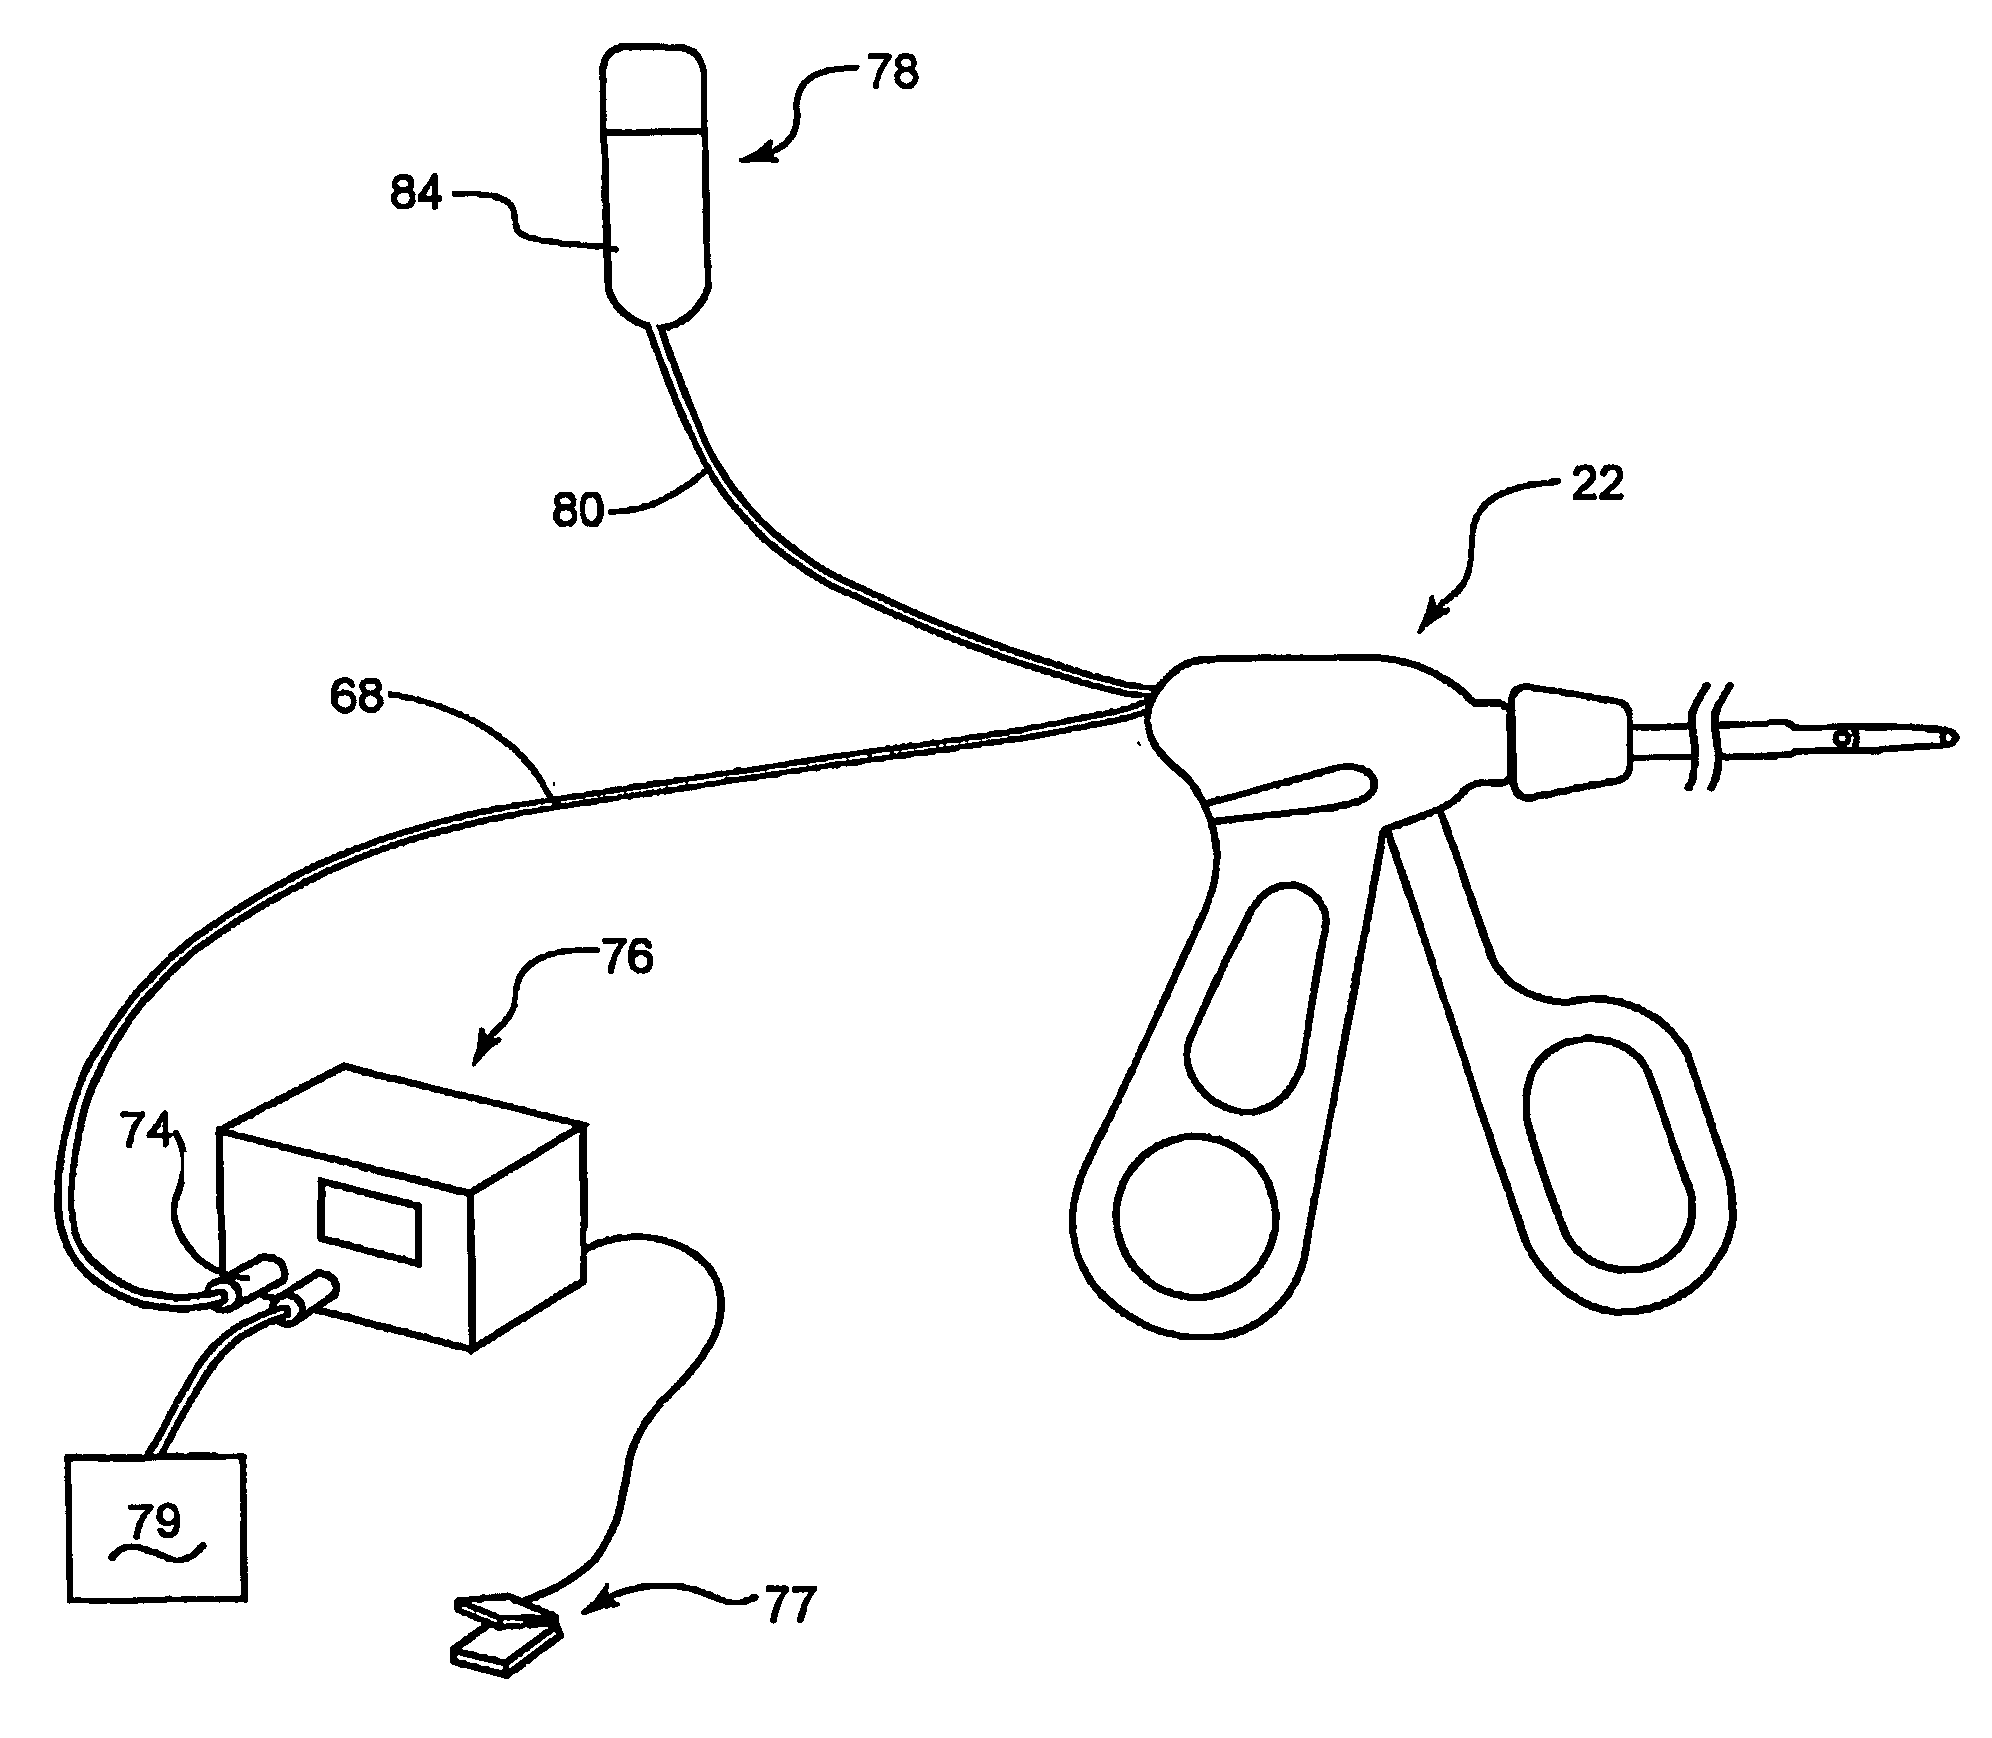 Fluid-assisted electrosurgical scissors and methods